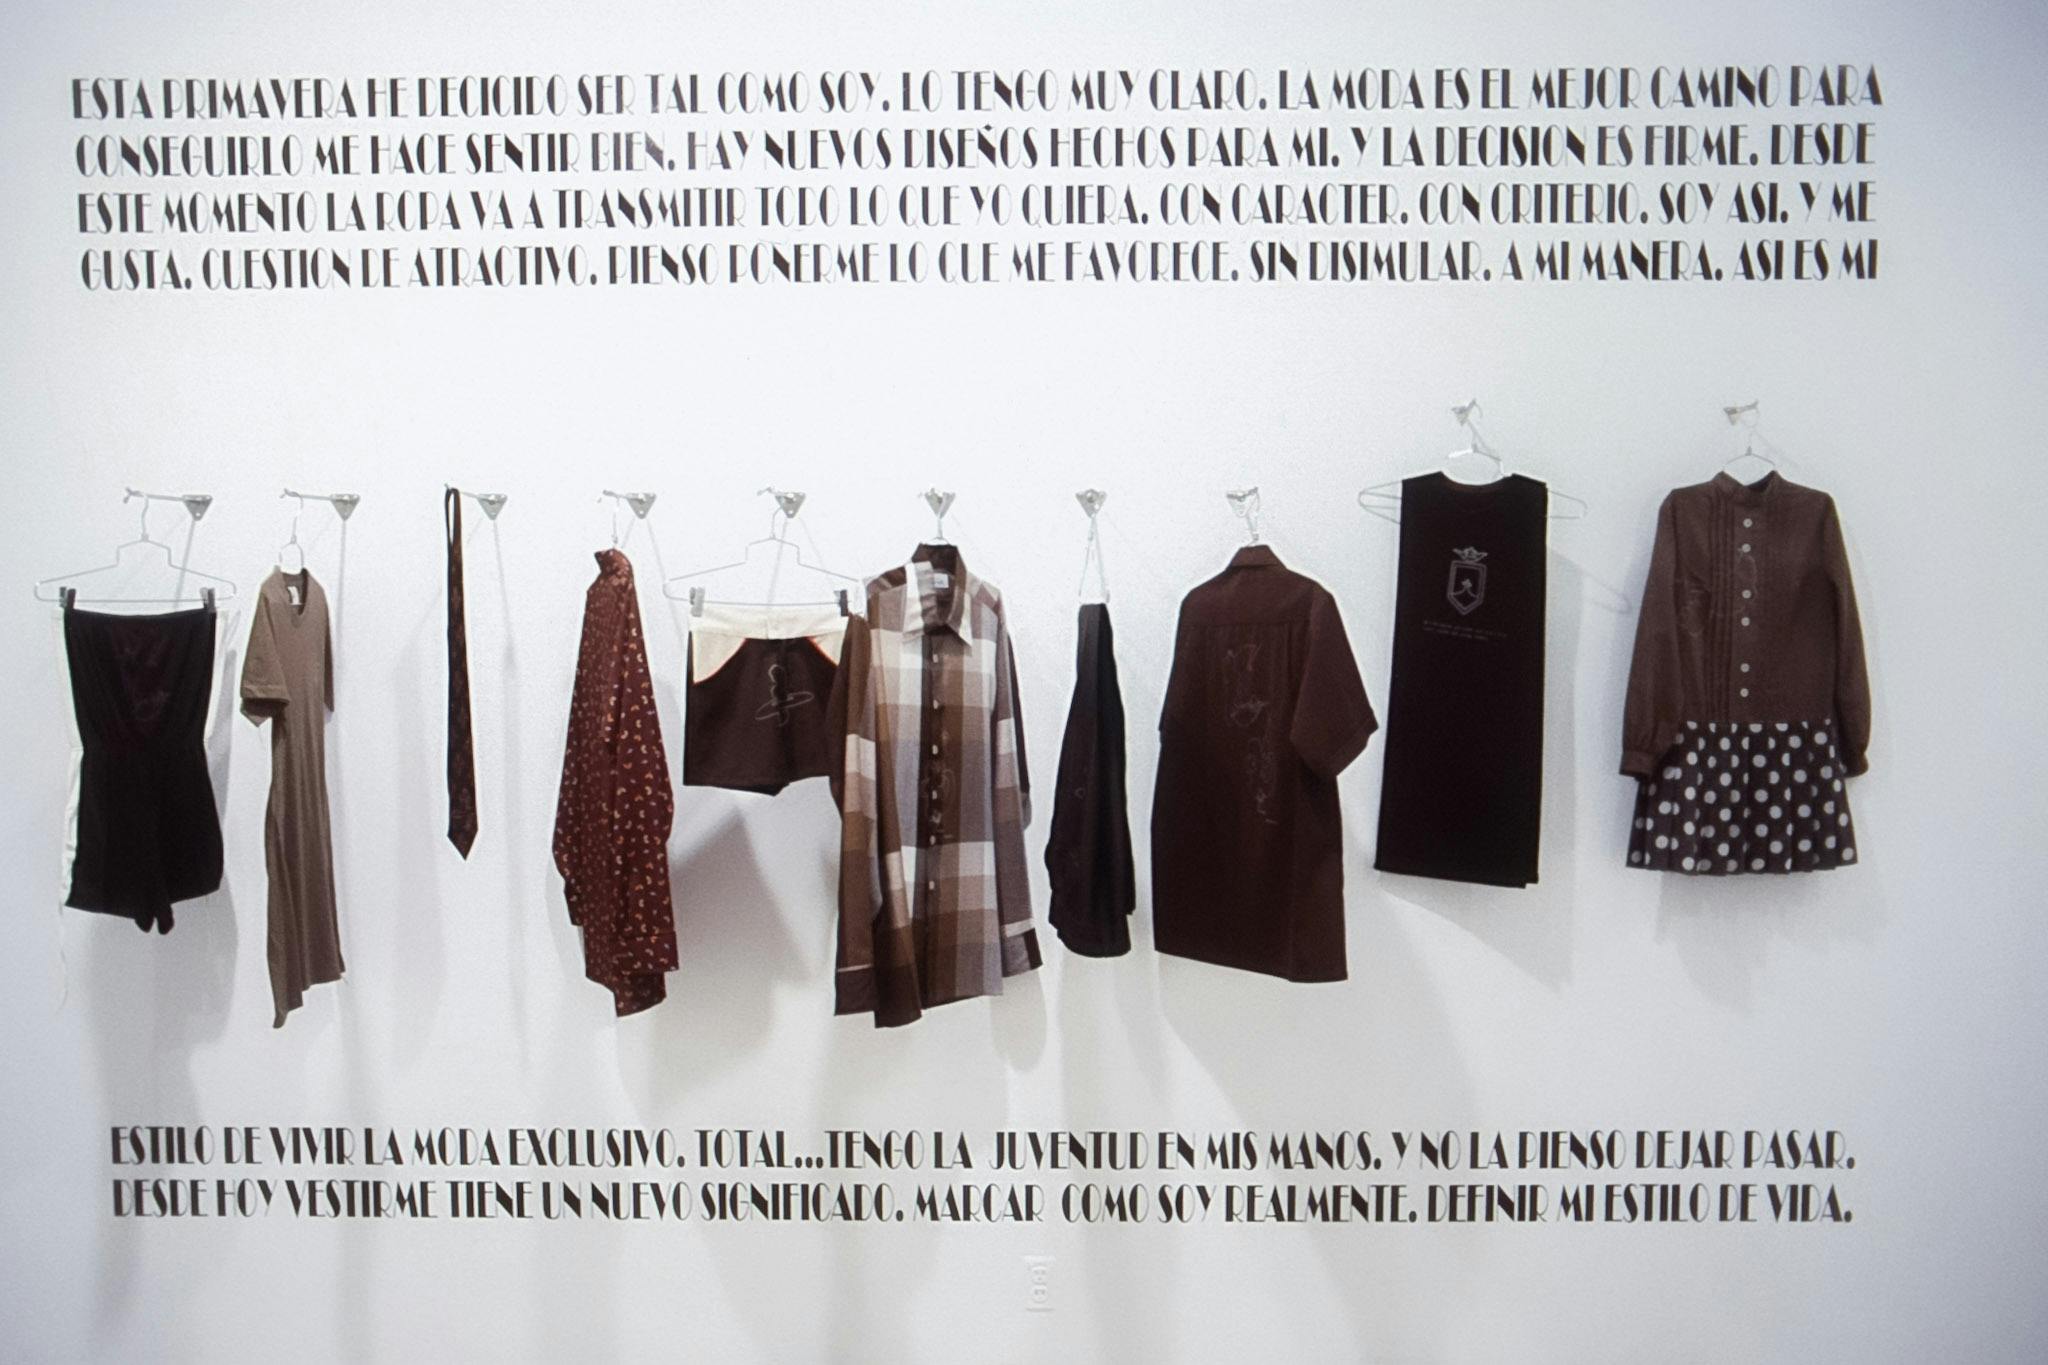 A front view of an installation artwork. Ten brown colored clothes are hung on the white gallery wall. There are Spanish texts written both above and below the clothes.  